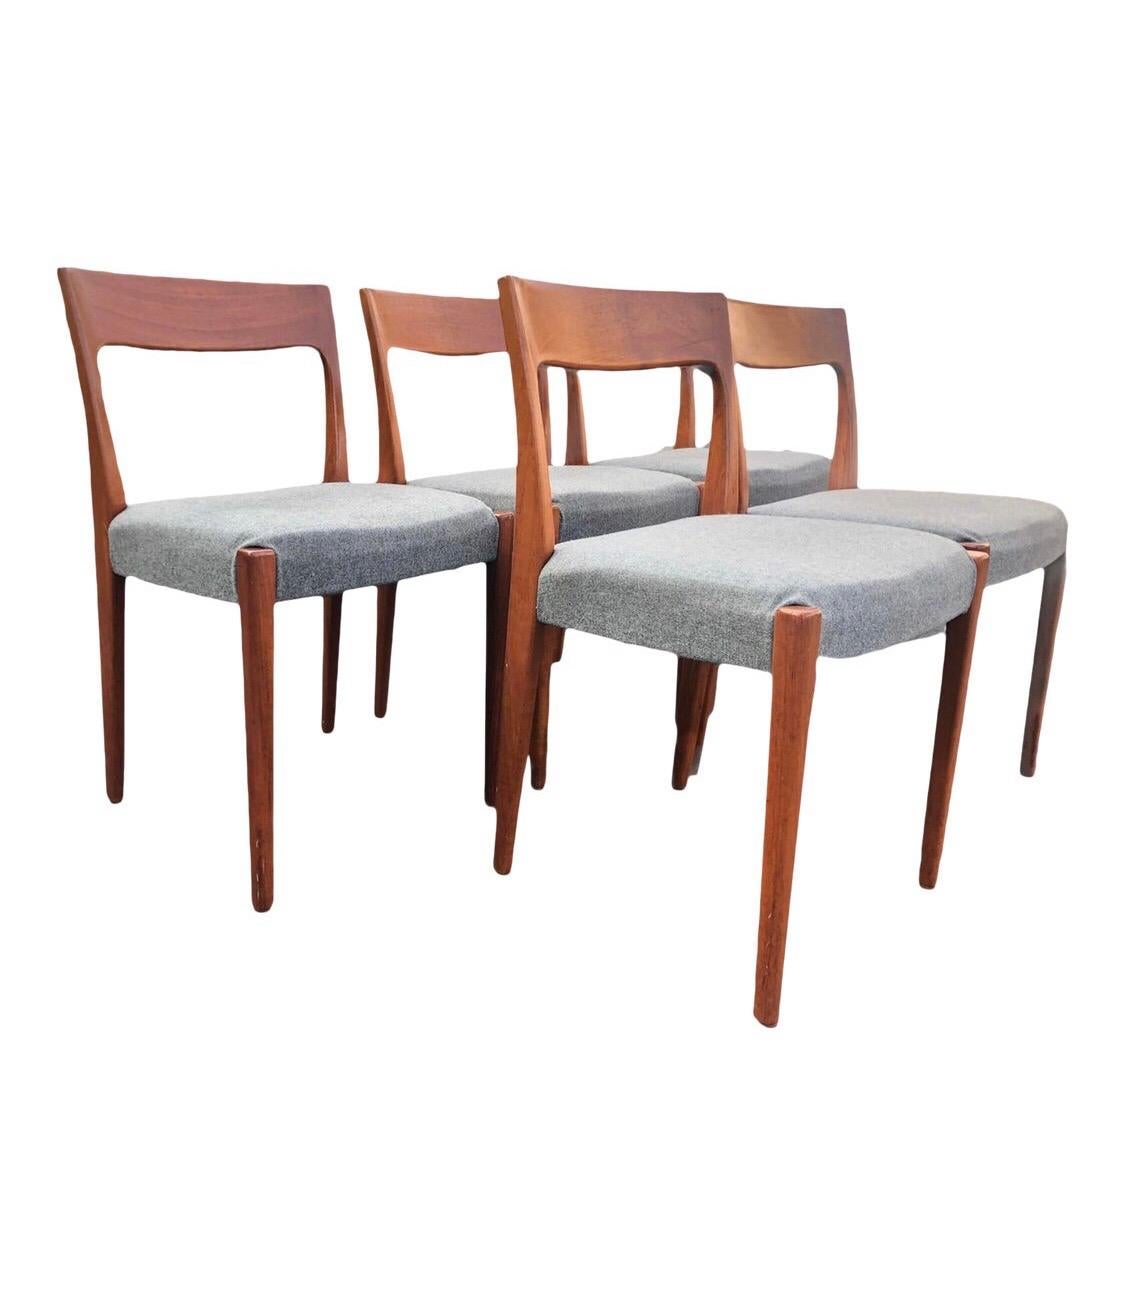 Vintage Danish Mid Century Modern Teak Dining Chairs, Priced Individually In Excellent Condition For Sale In Seattle, WA